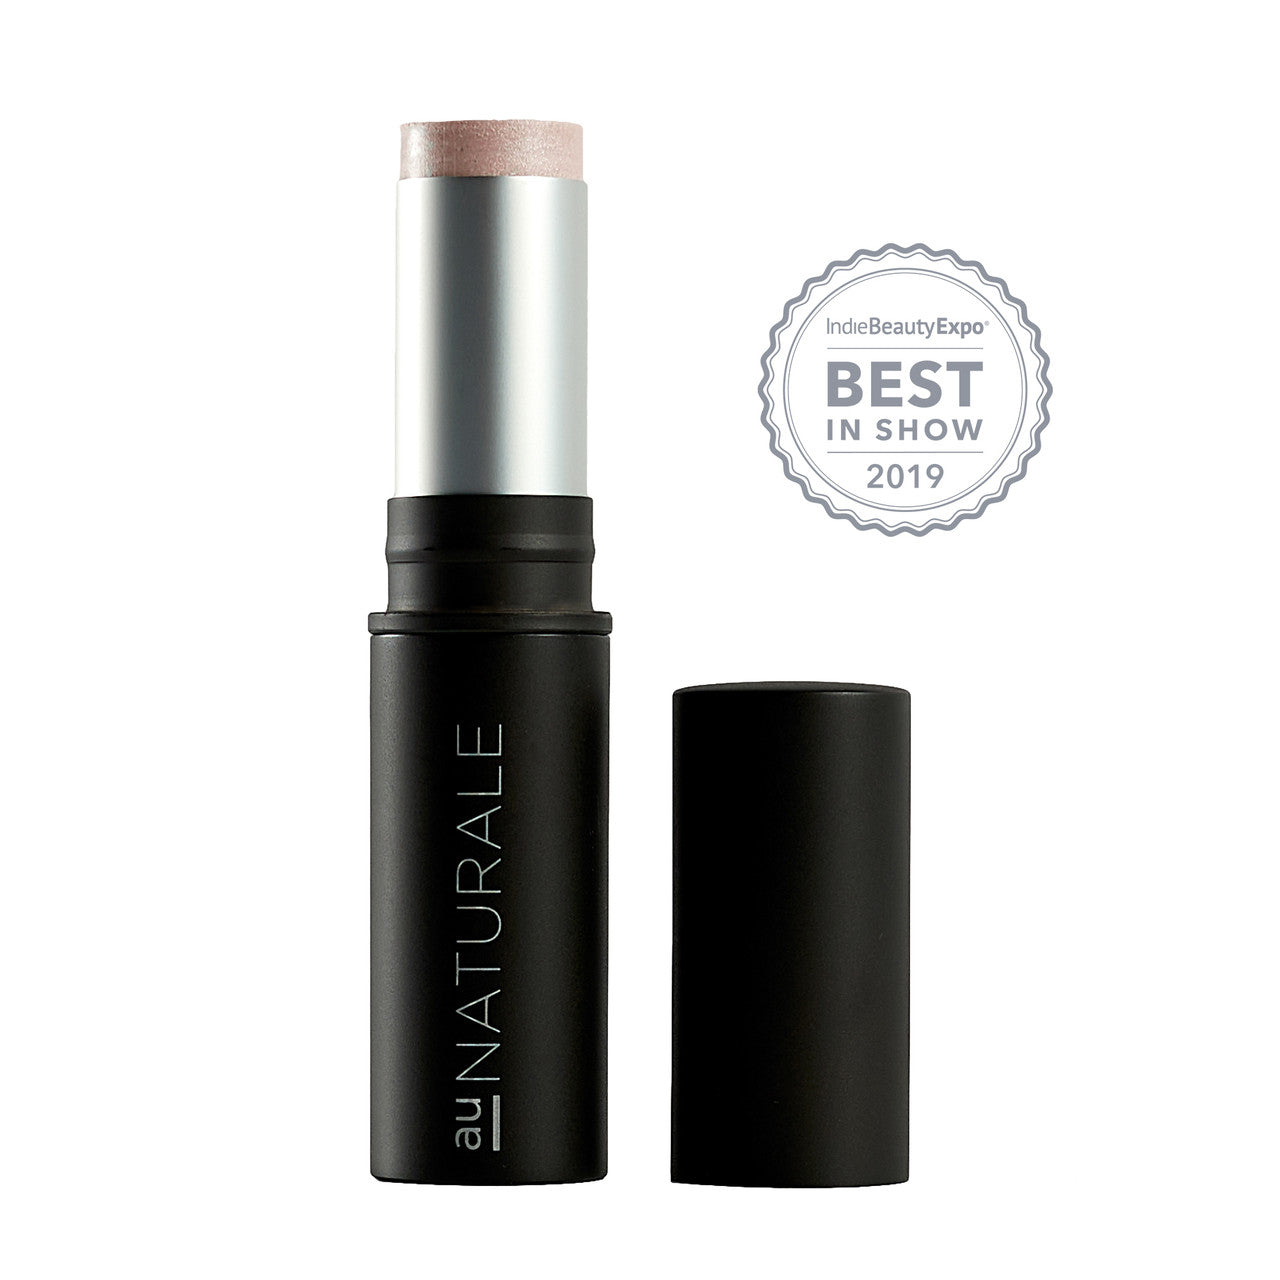 Au Naturale Cosmetics All-Glowing Creme Highlighter stick in Prosecco, clean beauty